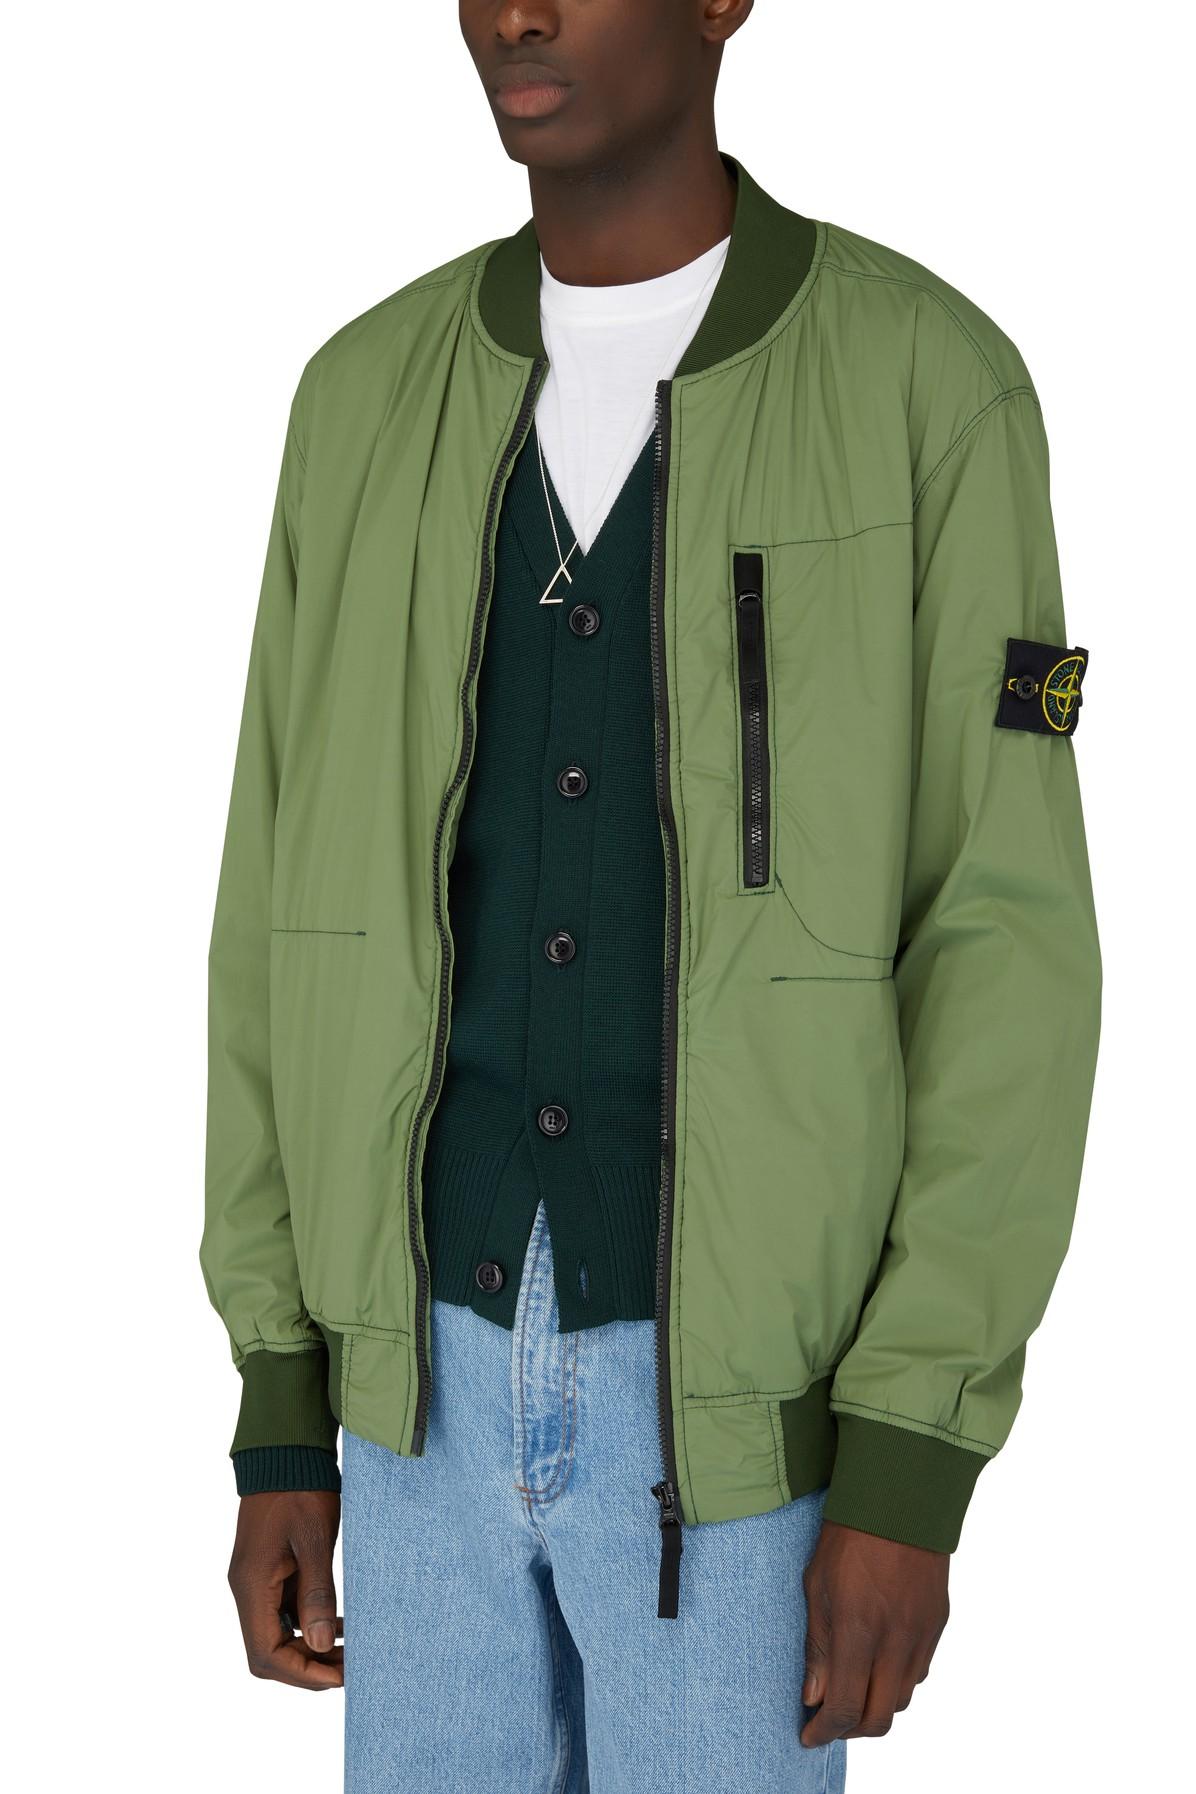 Stone Island Bomber Jacket in Olive (Green) for Men - Save 40% | Lyst